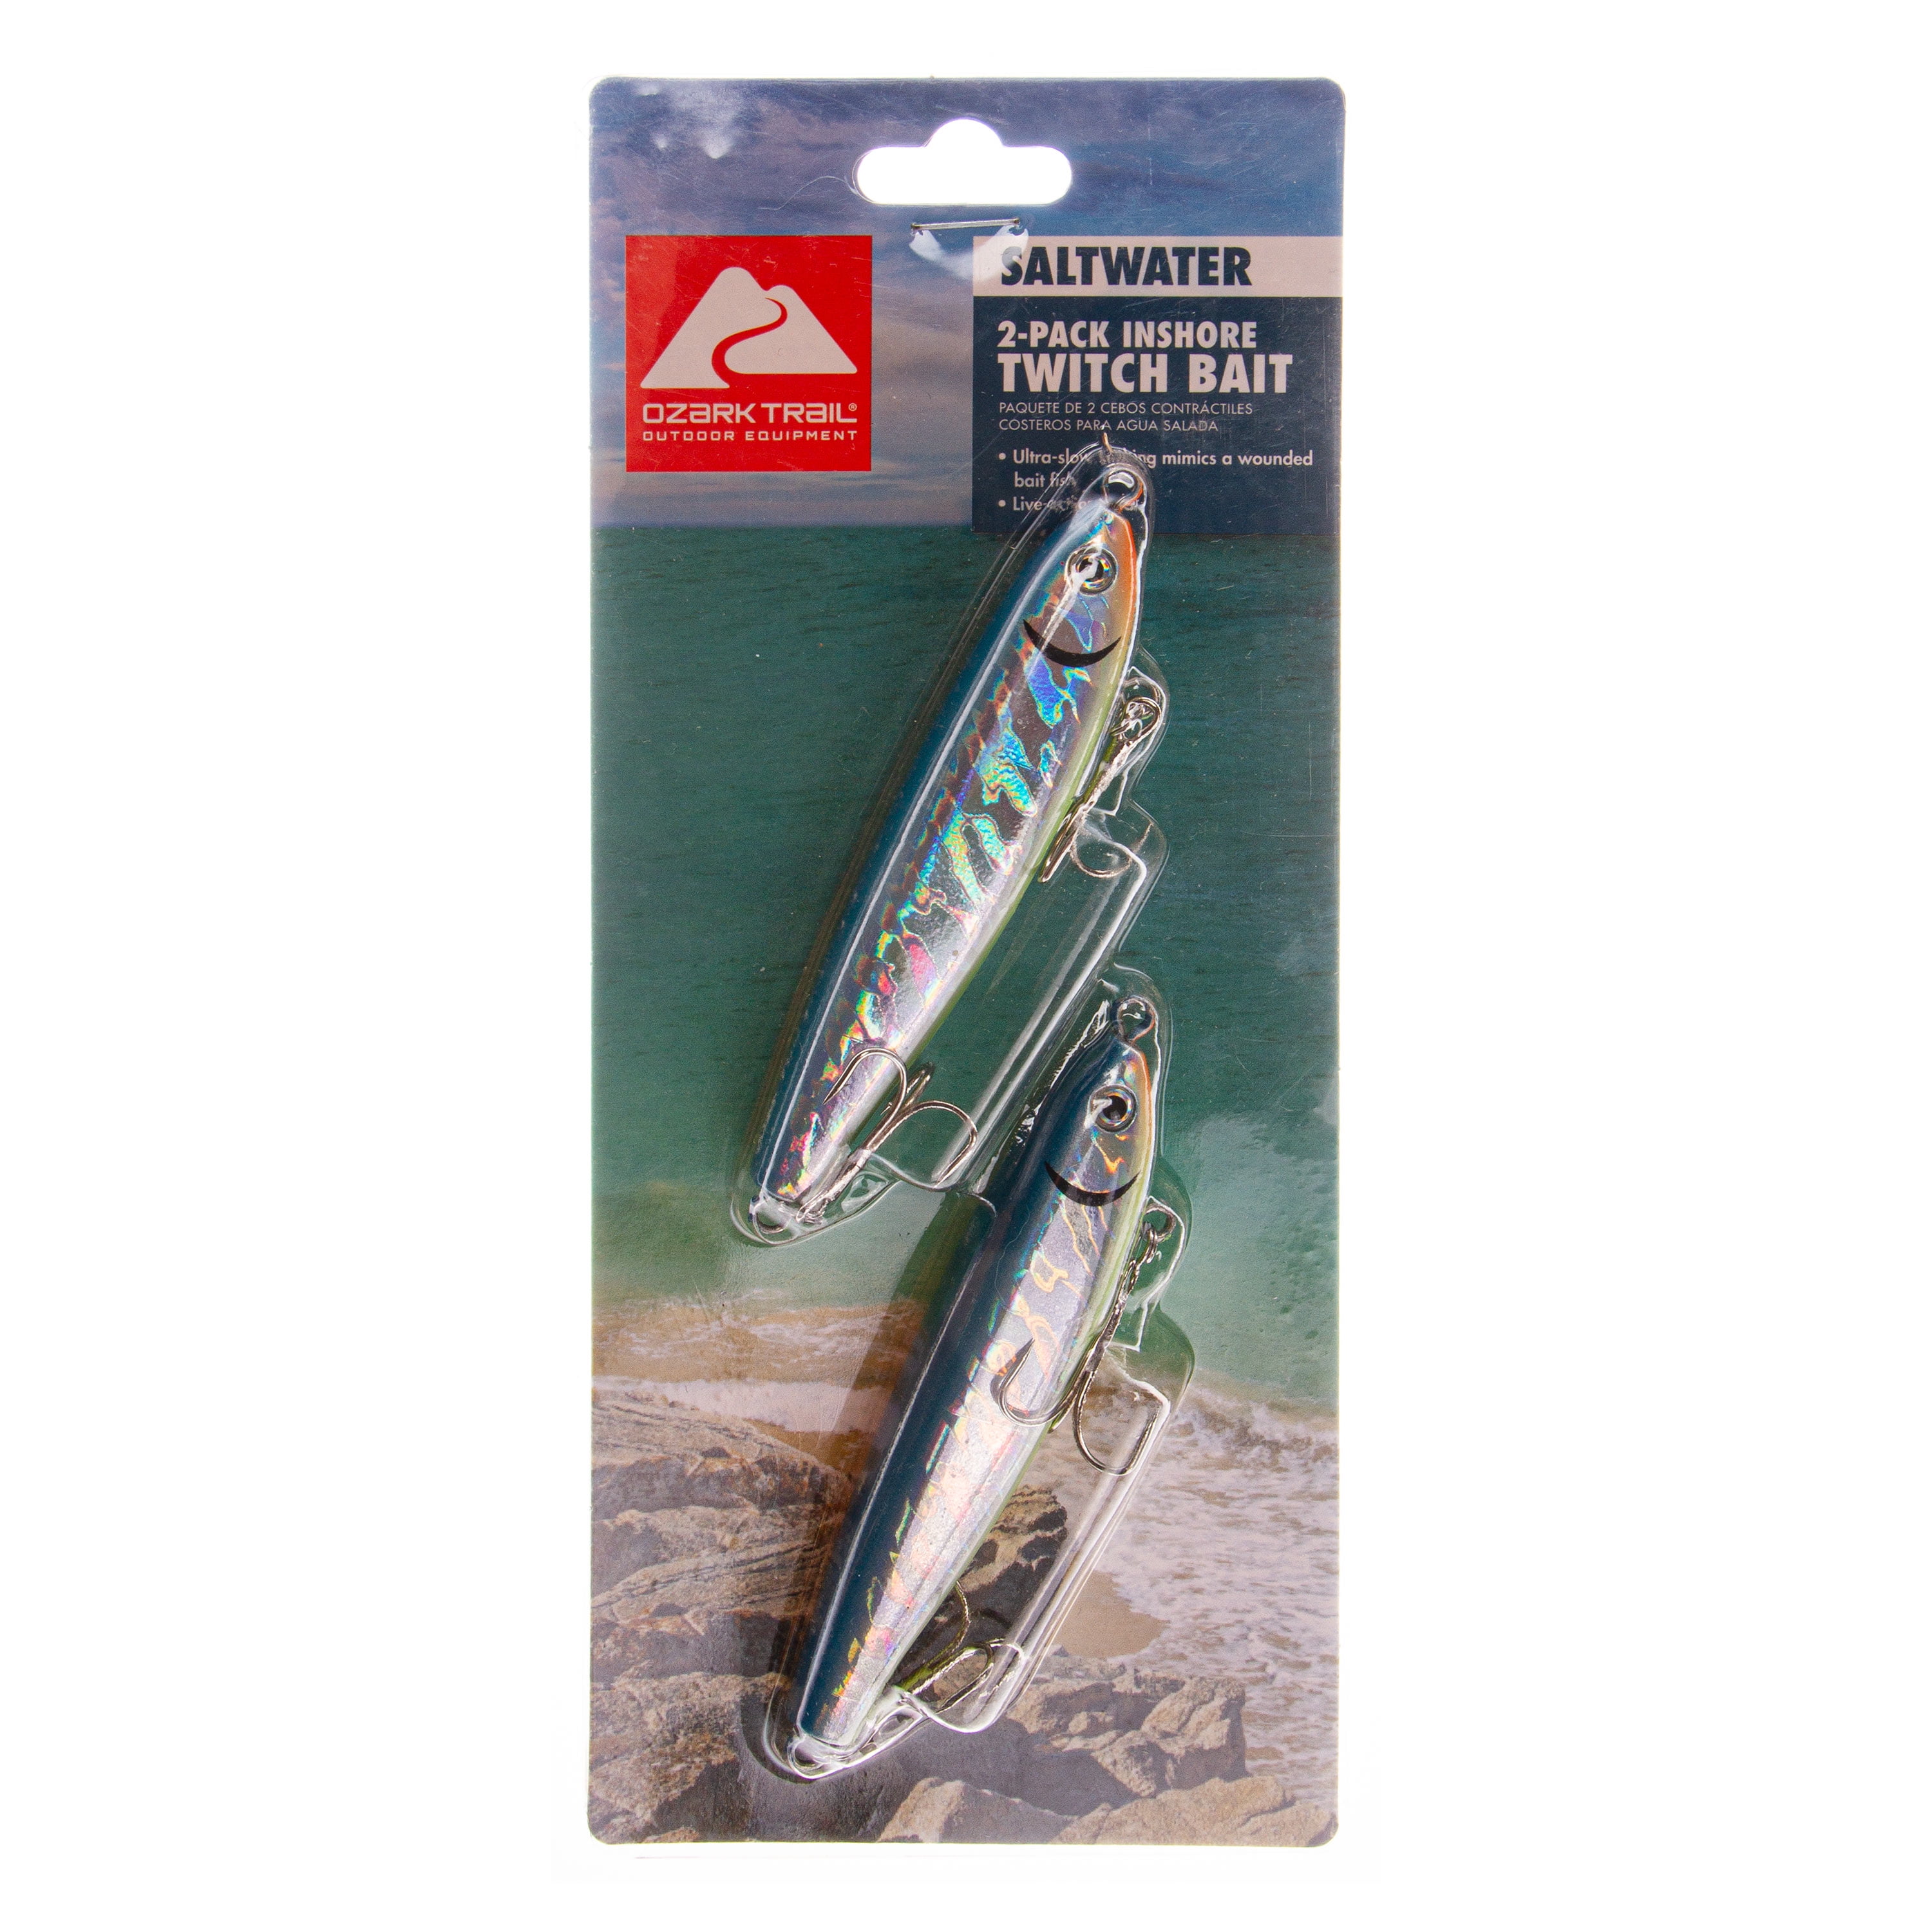 Ozark Trails Hard Plastic Saltwater Inshore Fishing Lure, 2-pack. Painted  in fish attracting colors.